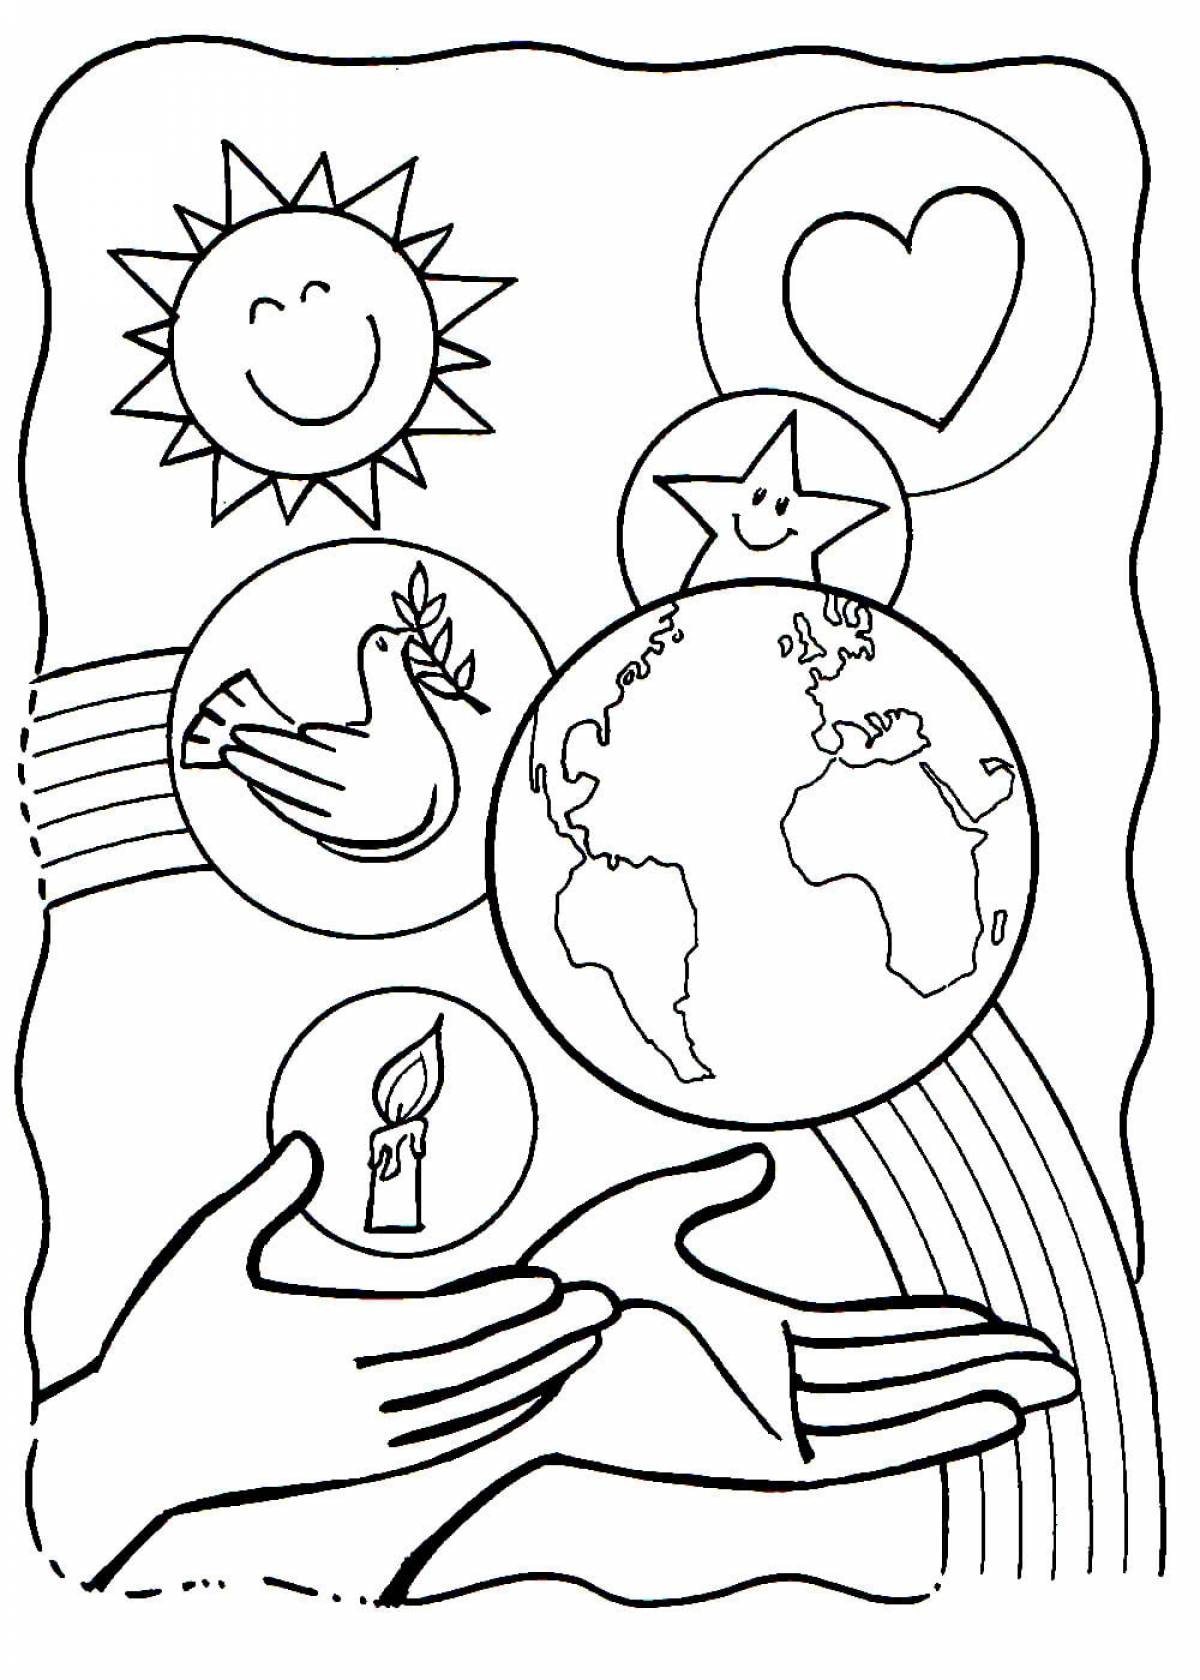 Fun coloring world without war for kids